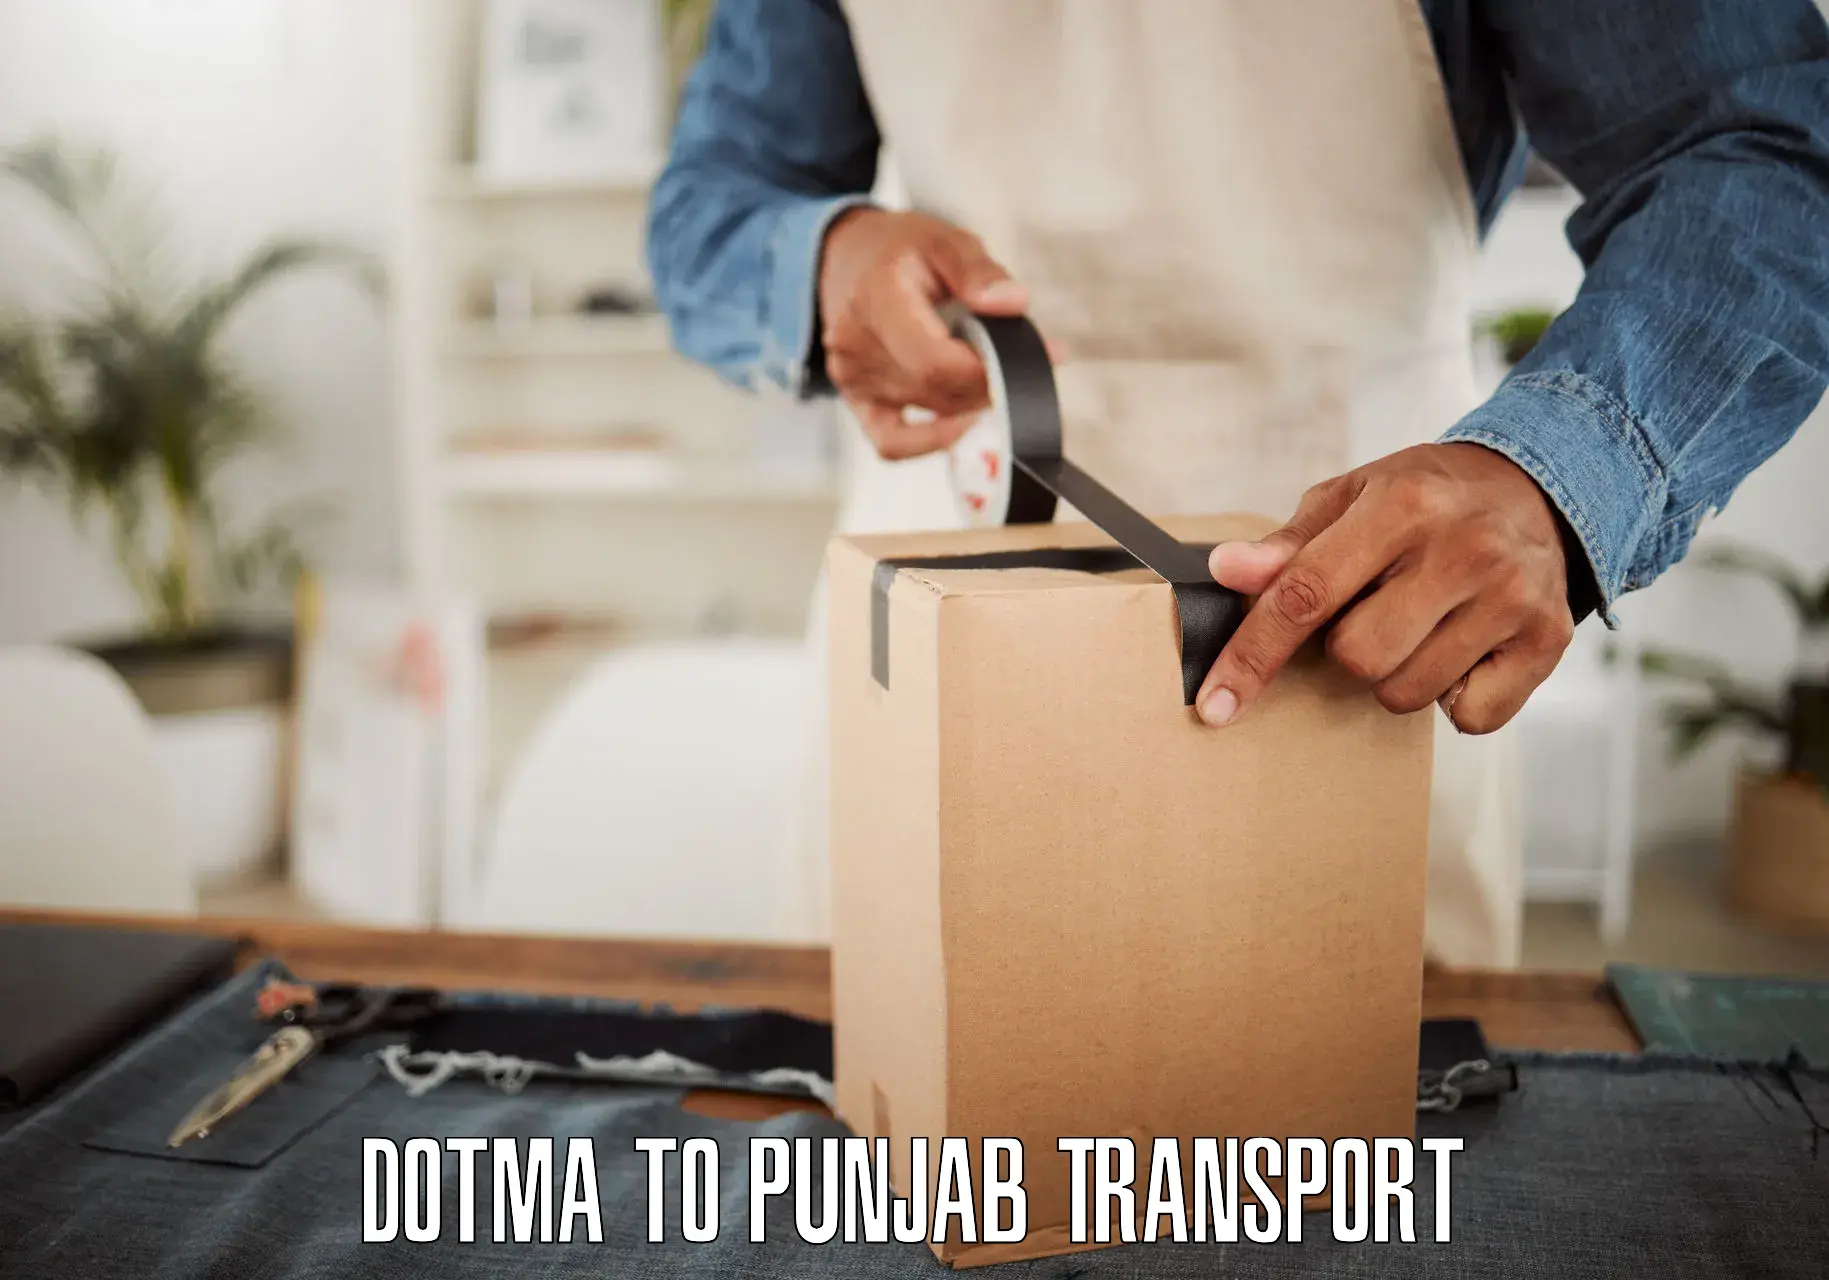 Express transport services Dotma to Pathankot